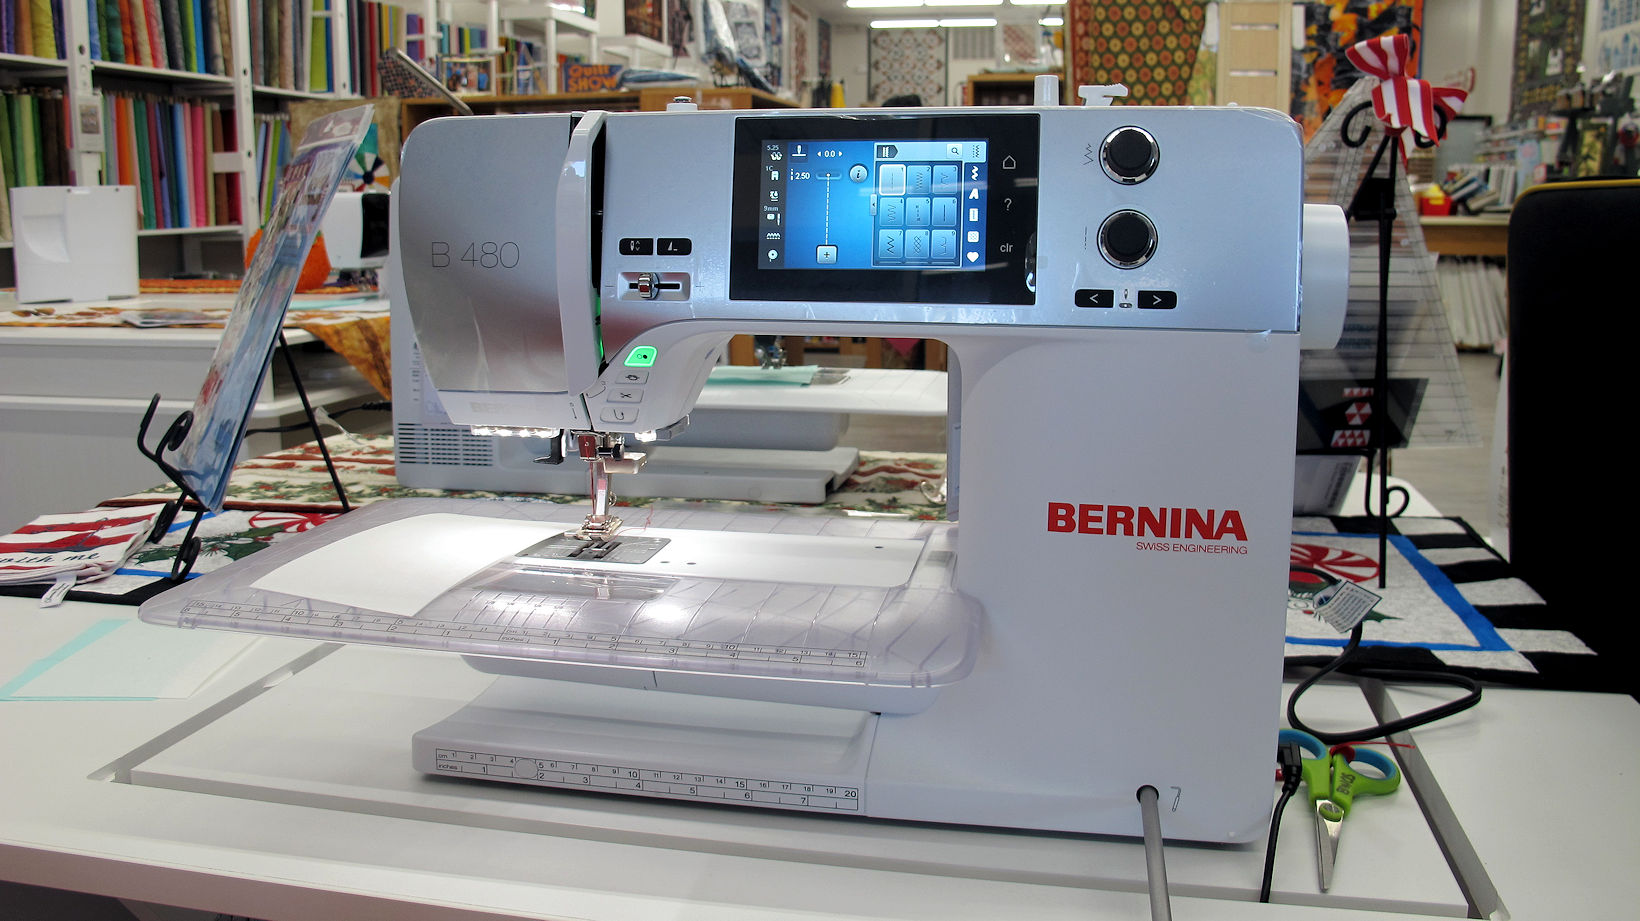 6 Best Bernina Sewing Machines - Take Your Sewing Skills to the Next Level! (Summer 2022)